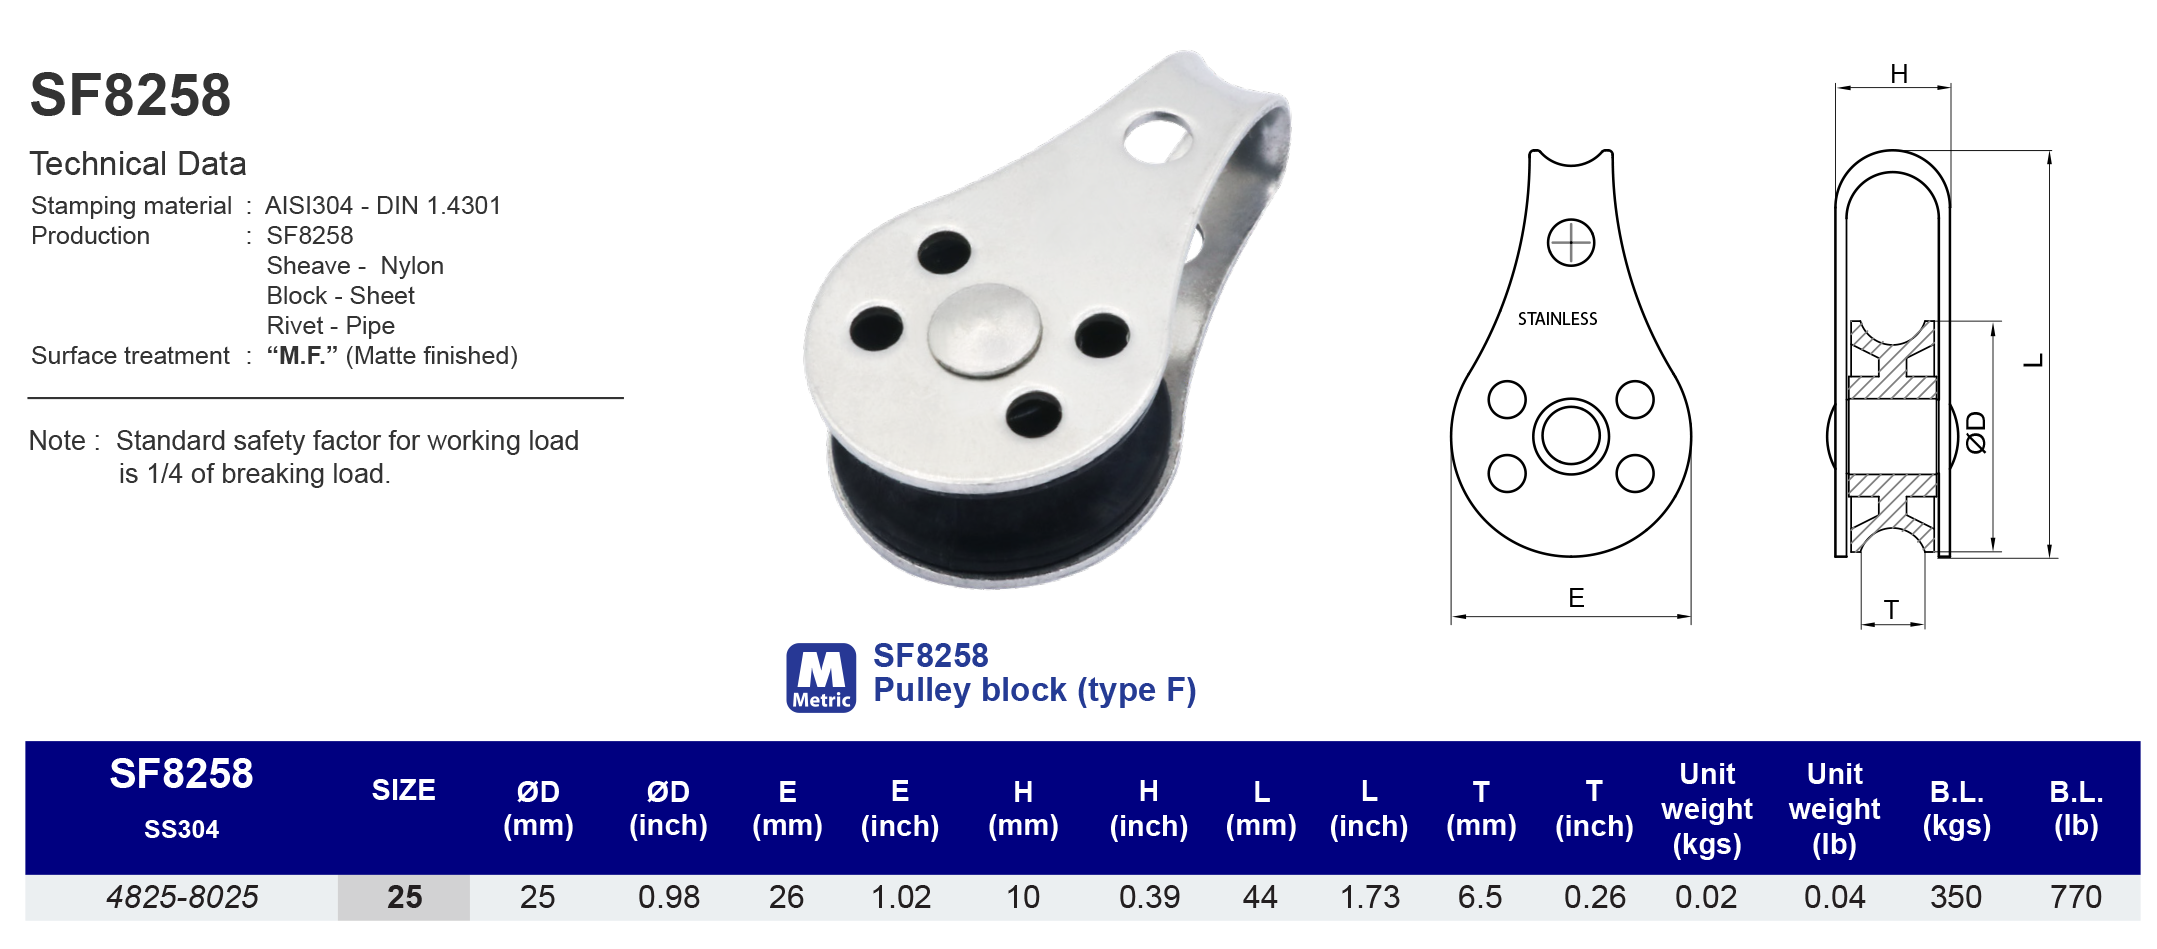 SF8258 Pulley block (type F) - 304